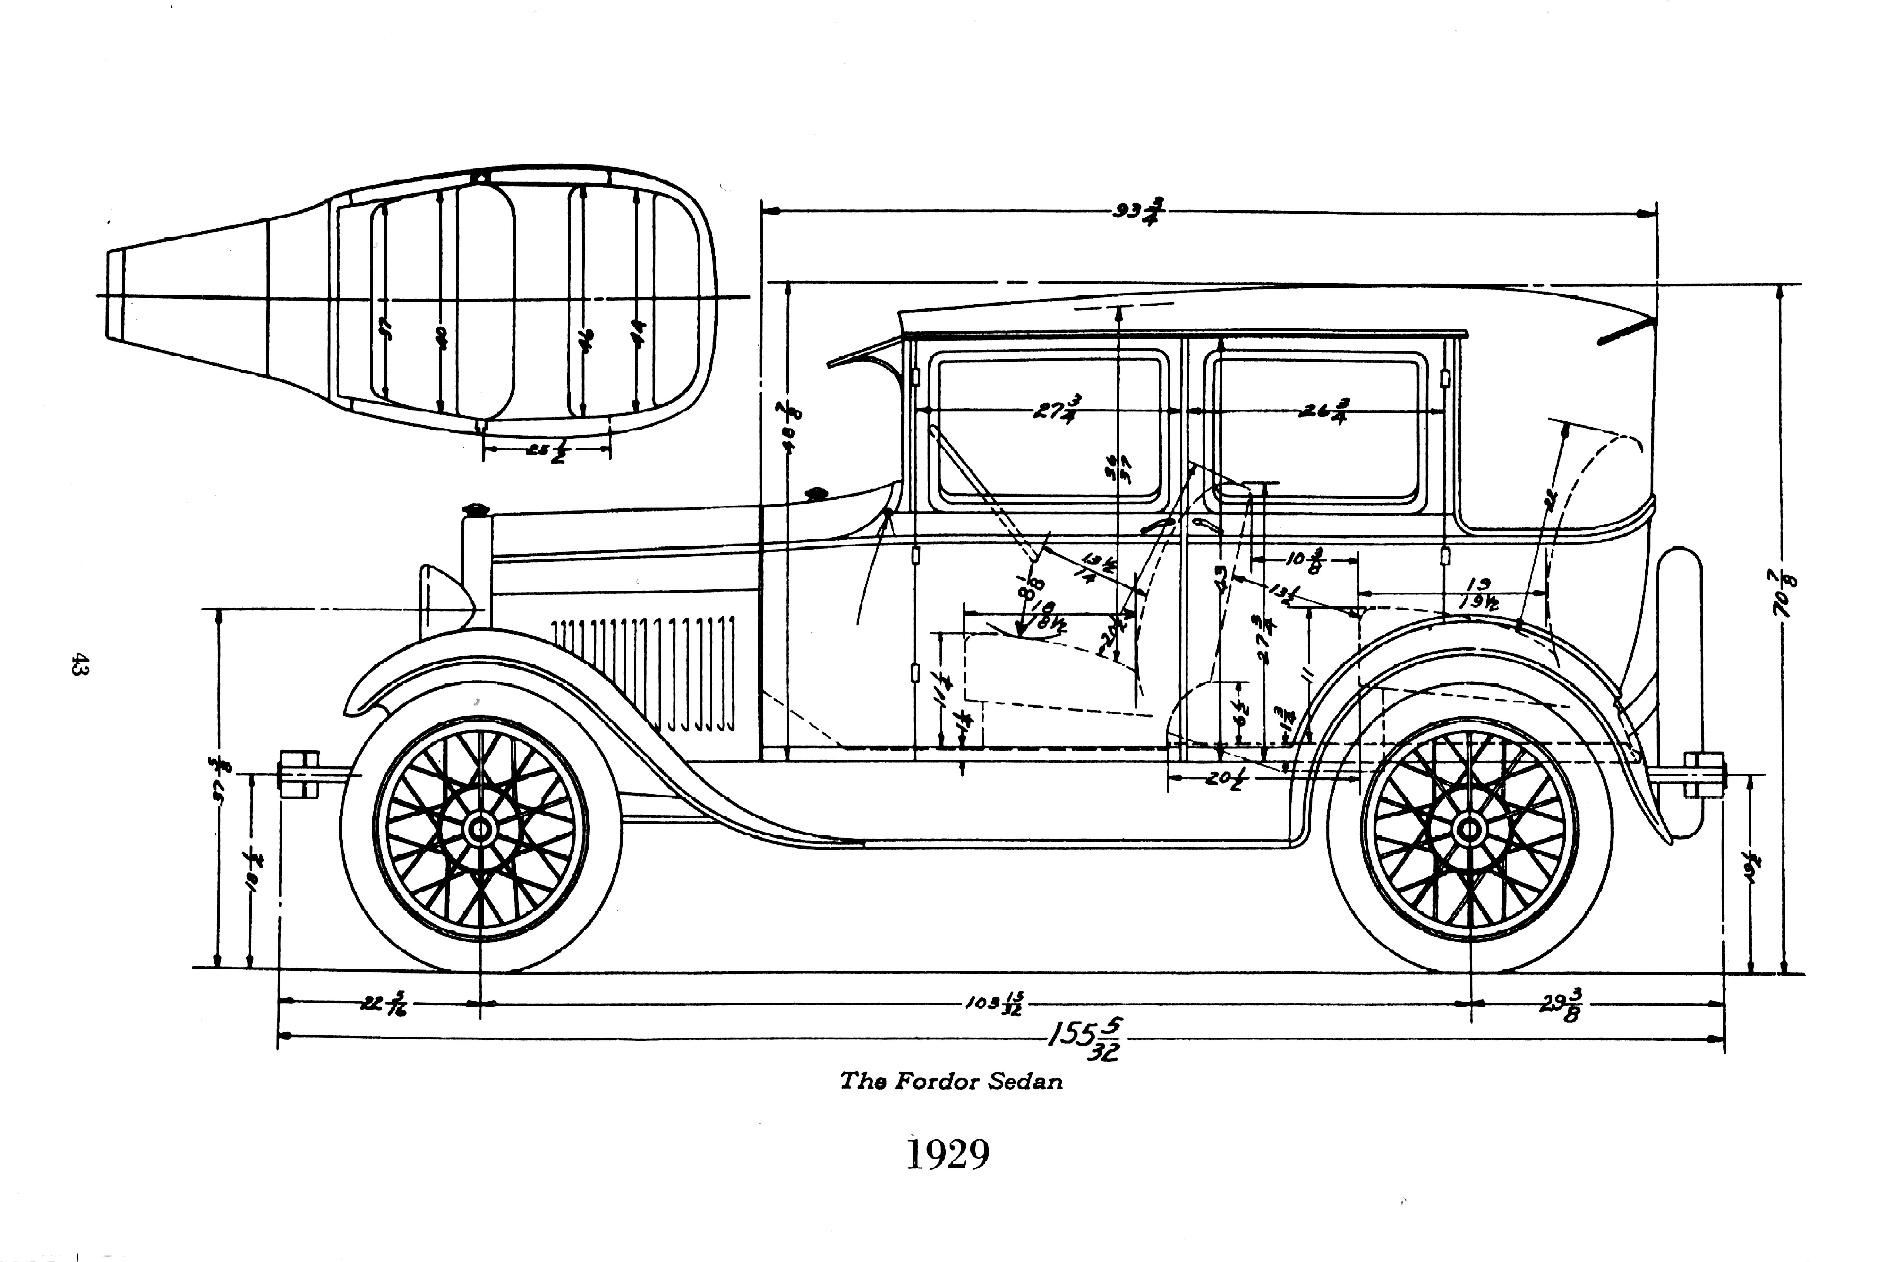 Ford model a chassis specs